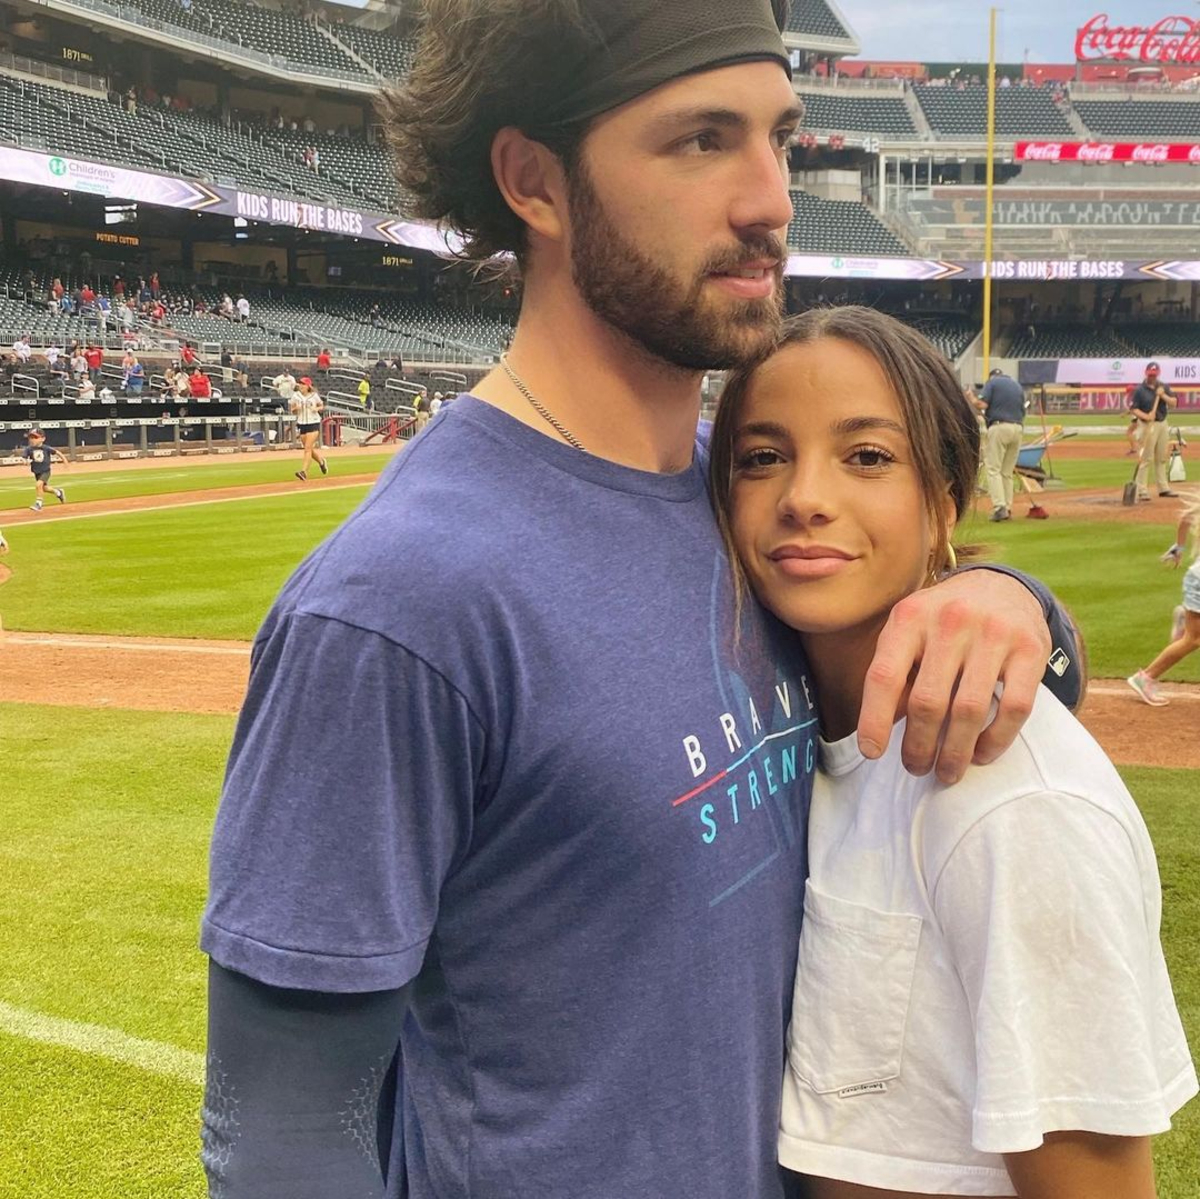 Hottest wives and girlfriends of MLB players 2022